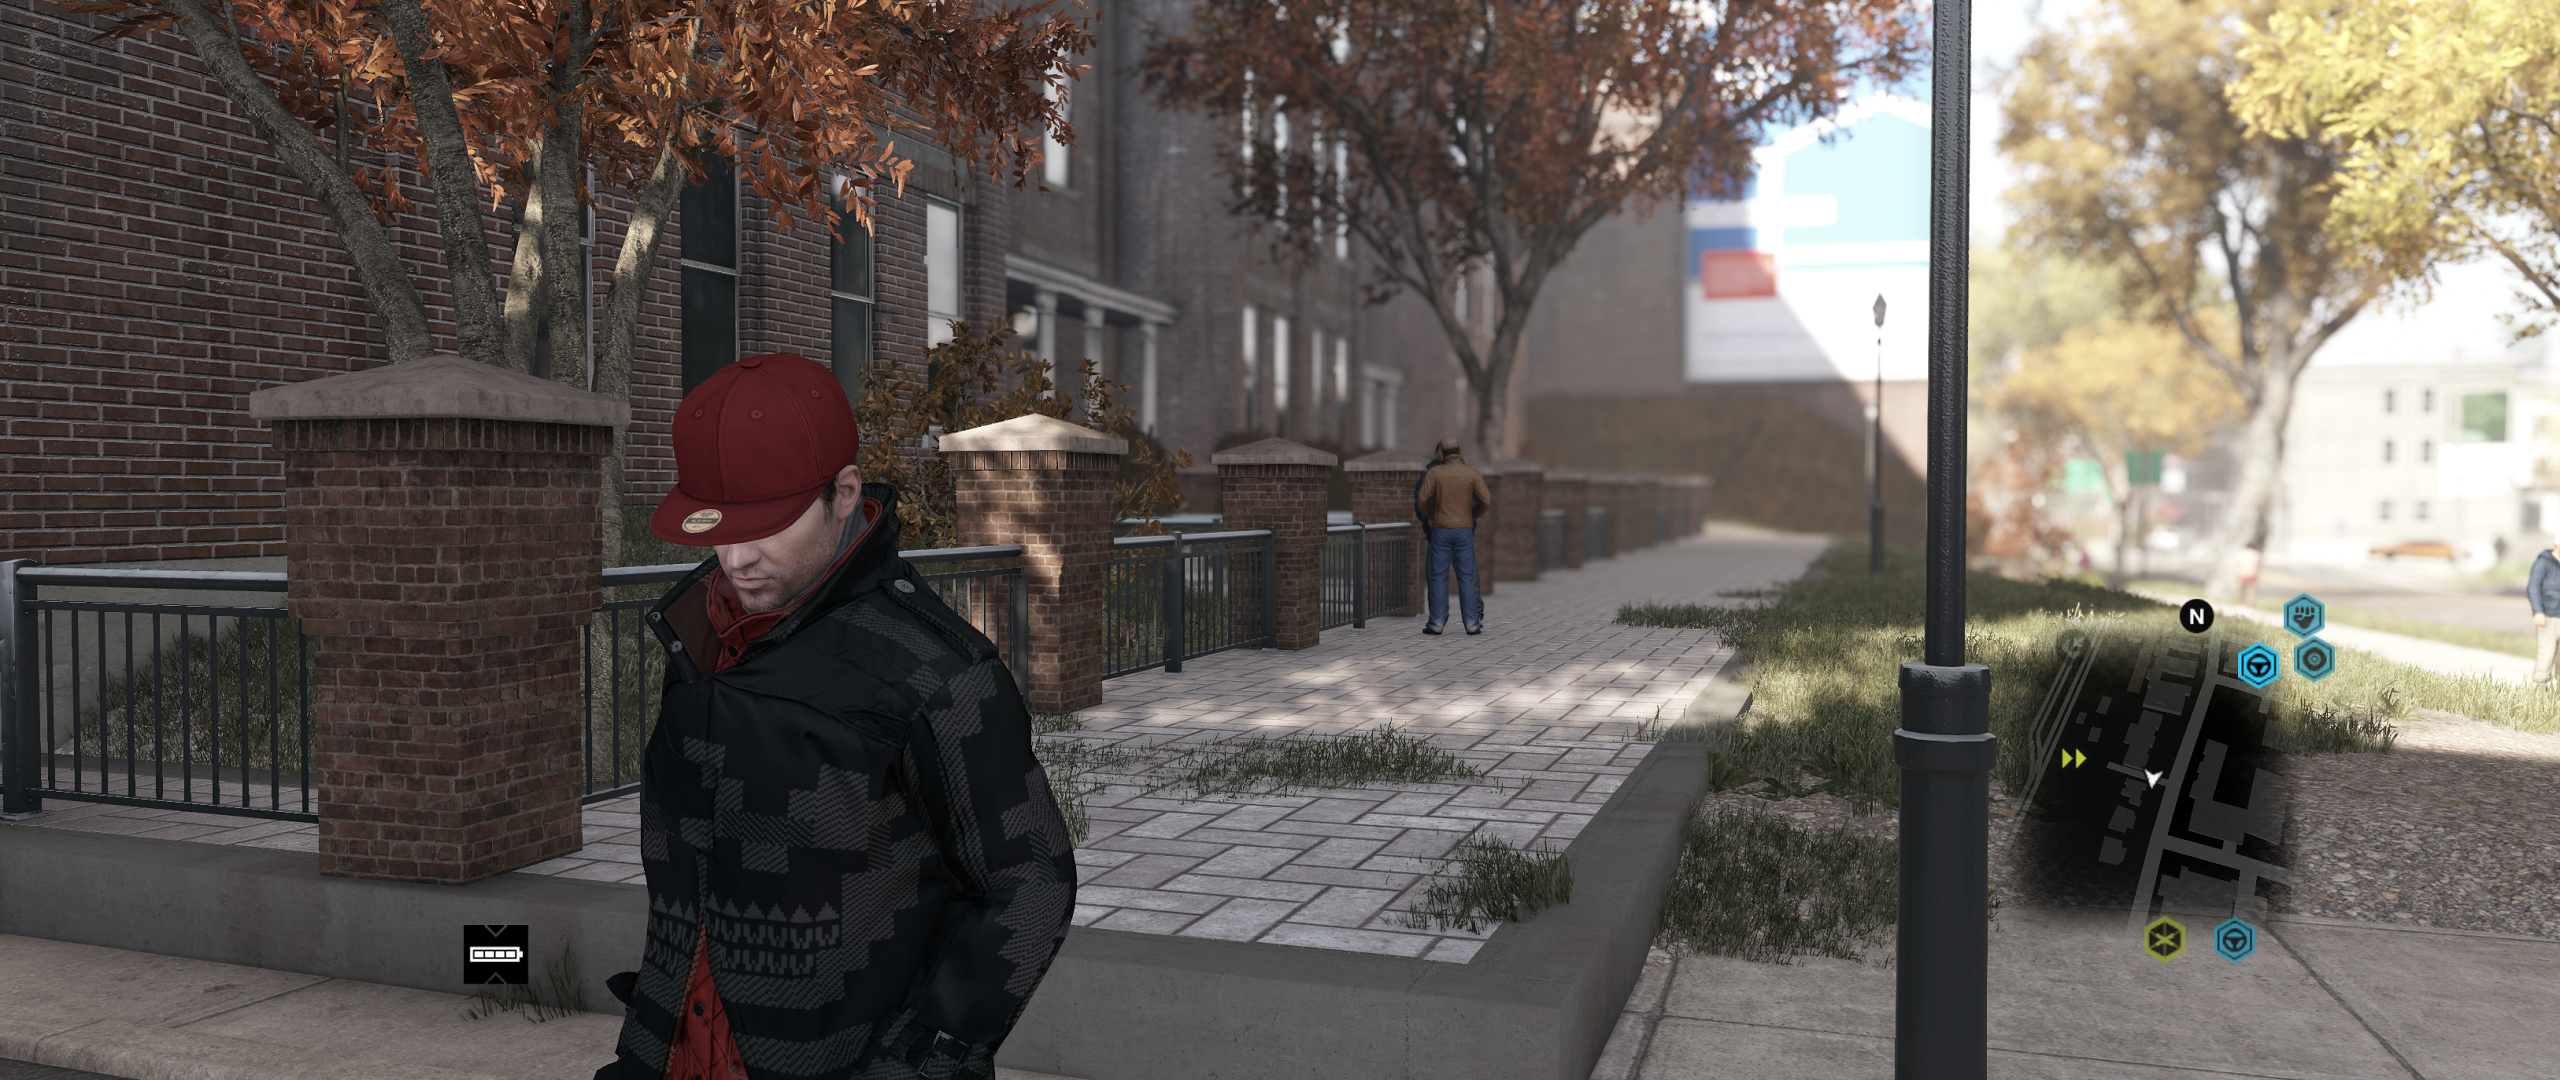 watch_dogs2014-06-1623vyyq.png